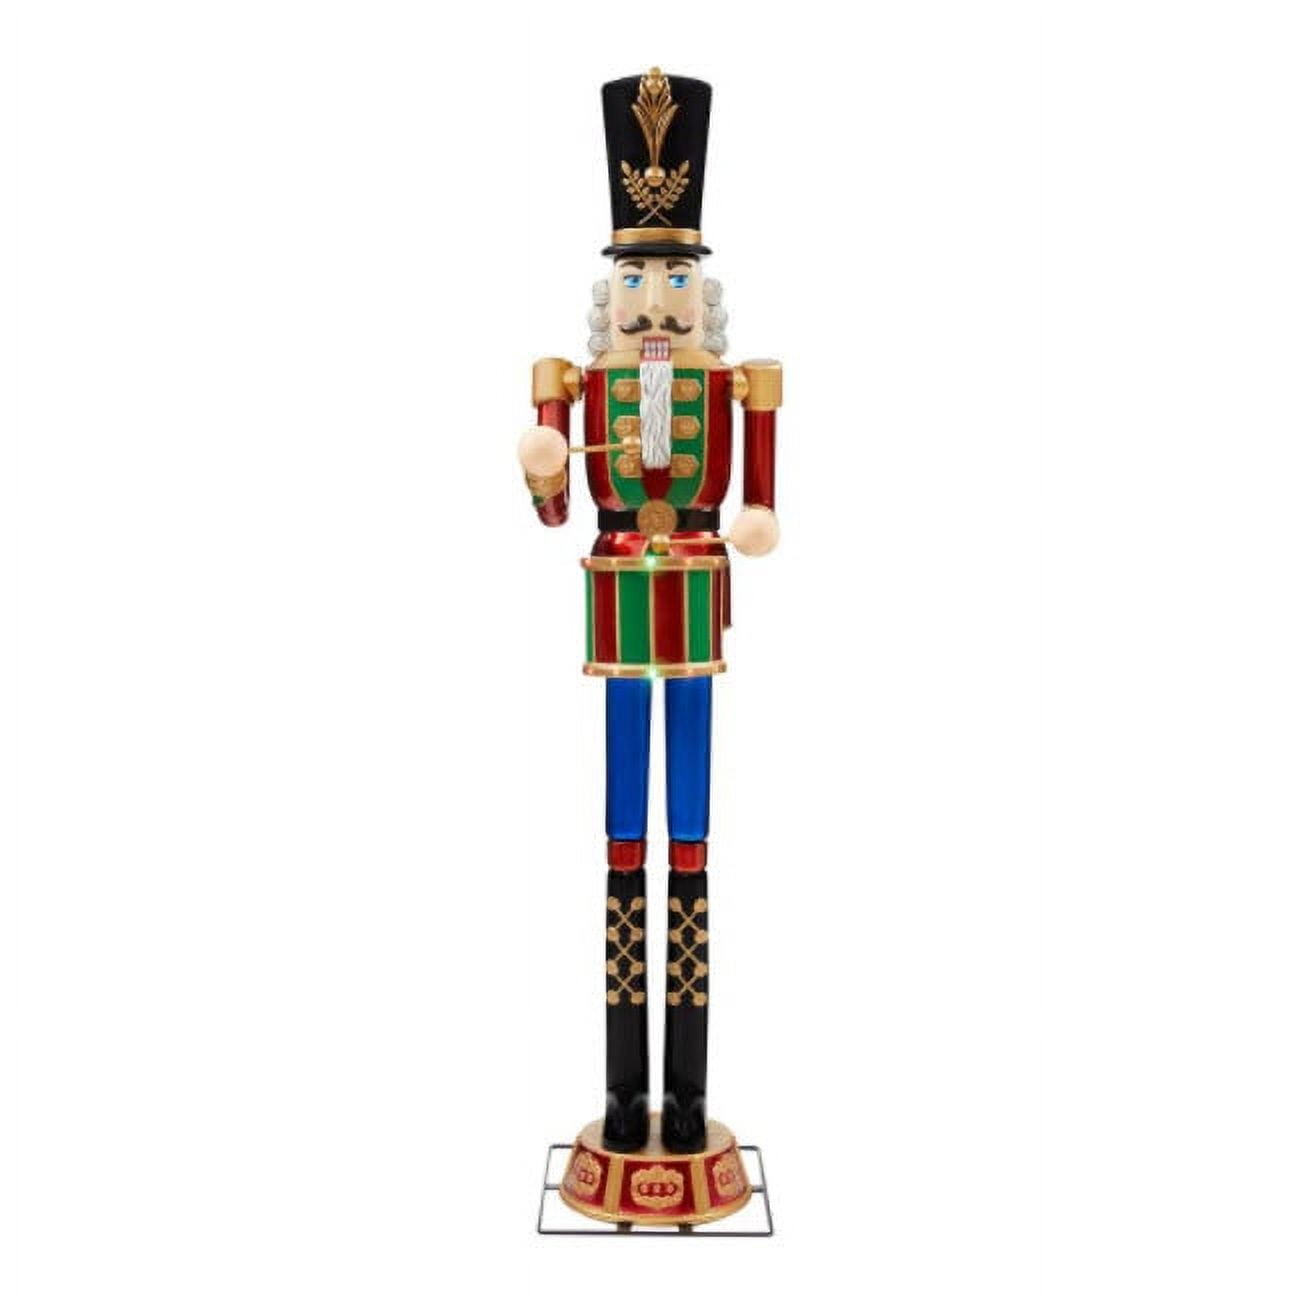 Home Accents Holiday Christmas Yard Decoration Giant Nutcracker 8 ft ...